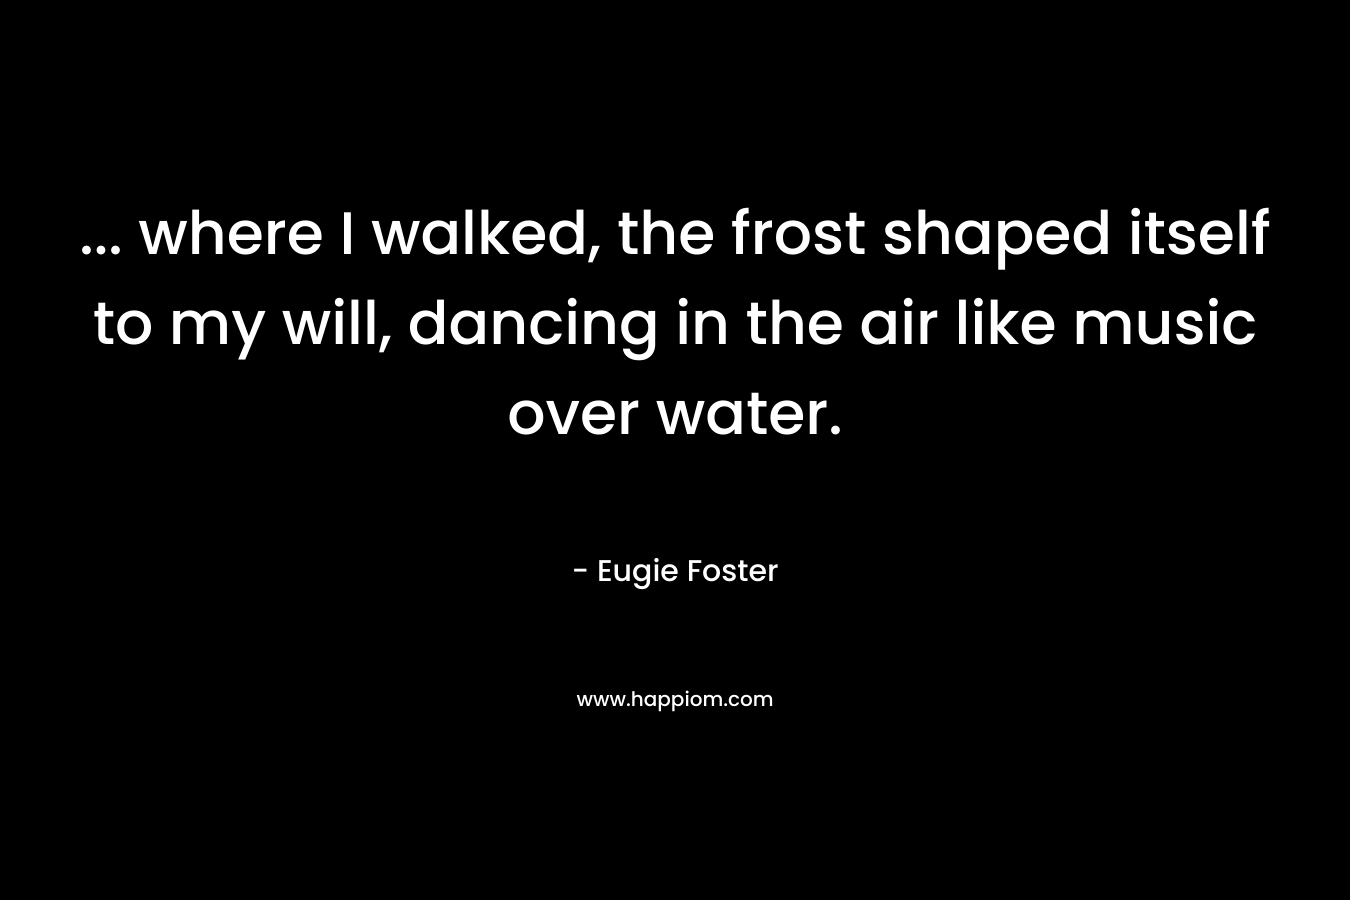 … where I walked, the frost shaped itself to my will, dancing in the air like music over water. – Eugie Foster